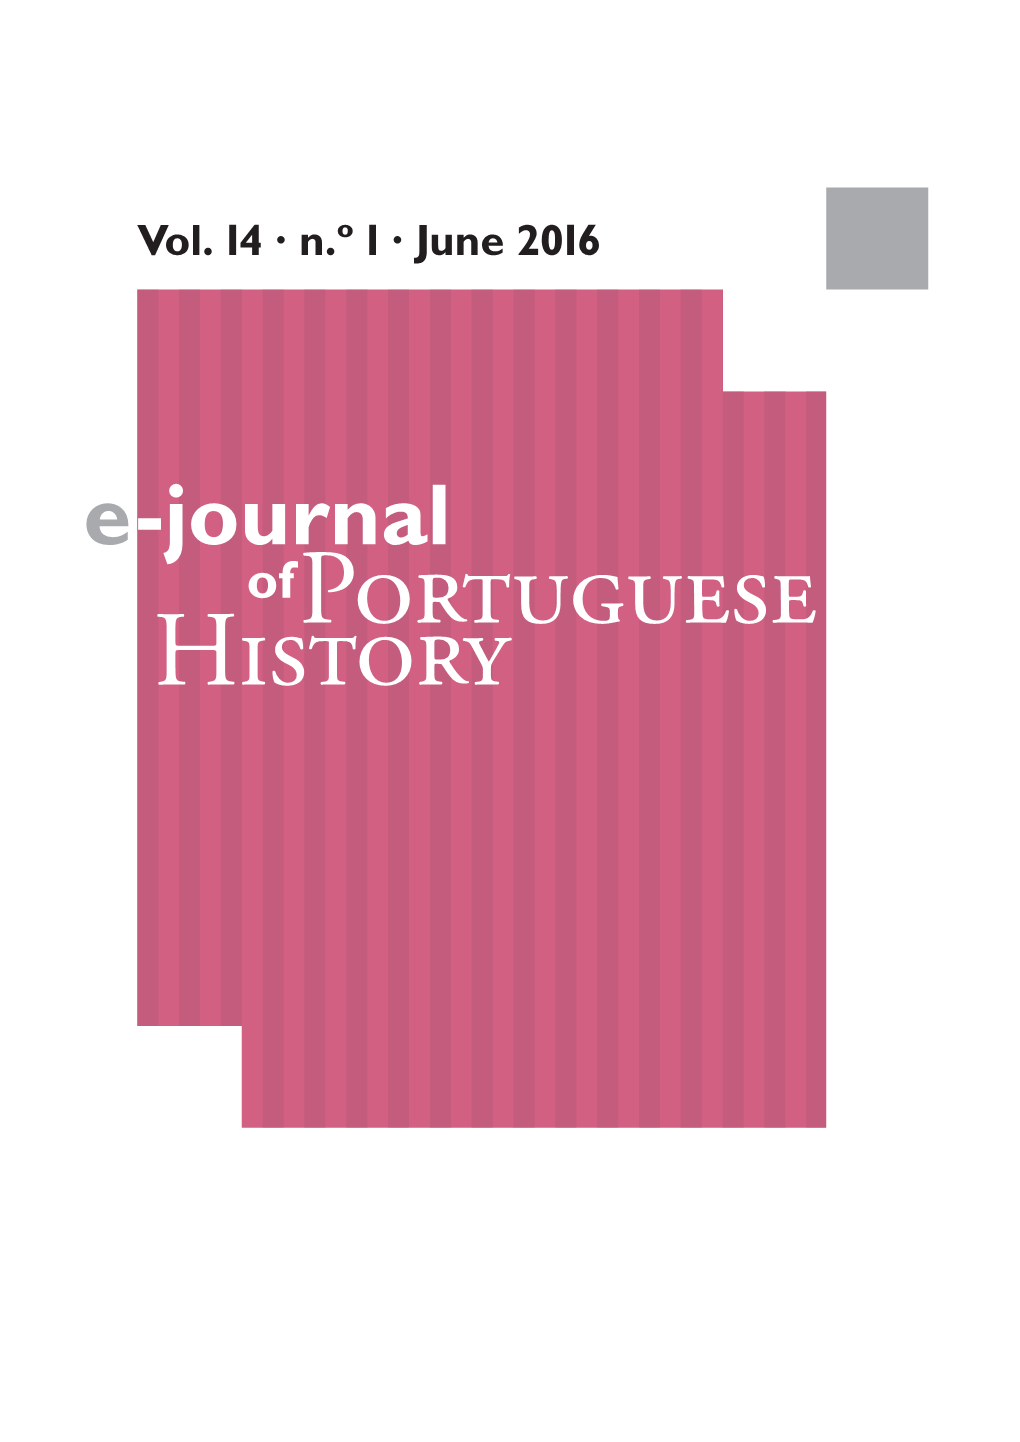 Ofportuguese History Table of Contents Volume 14, Number 1, June 2016